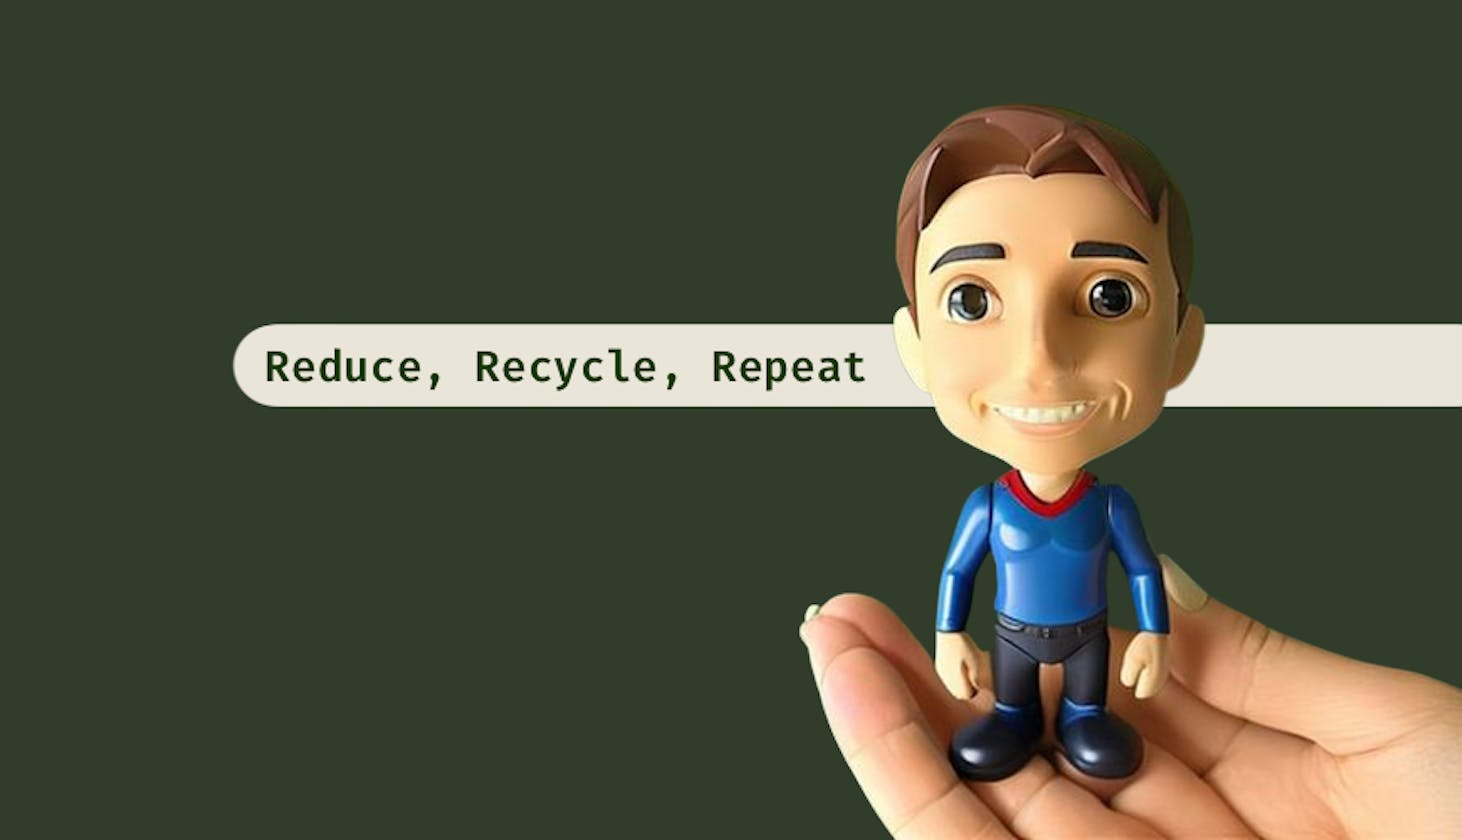 The 3 Rs: Reduce, Recycle, Repeat